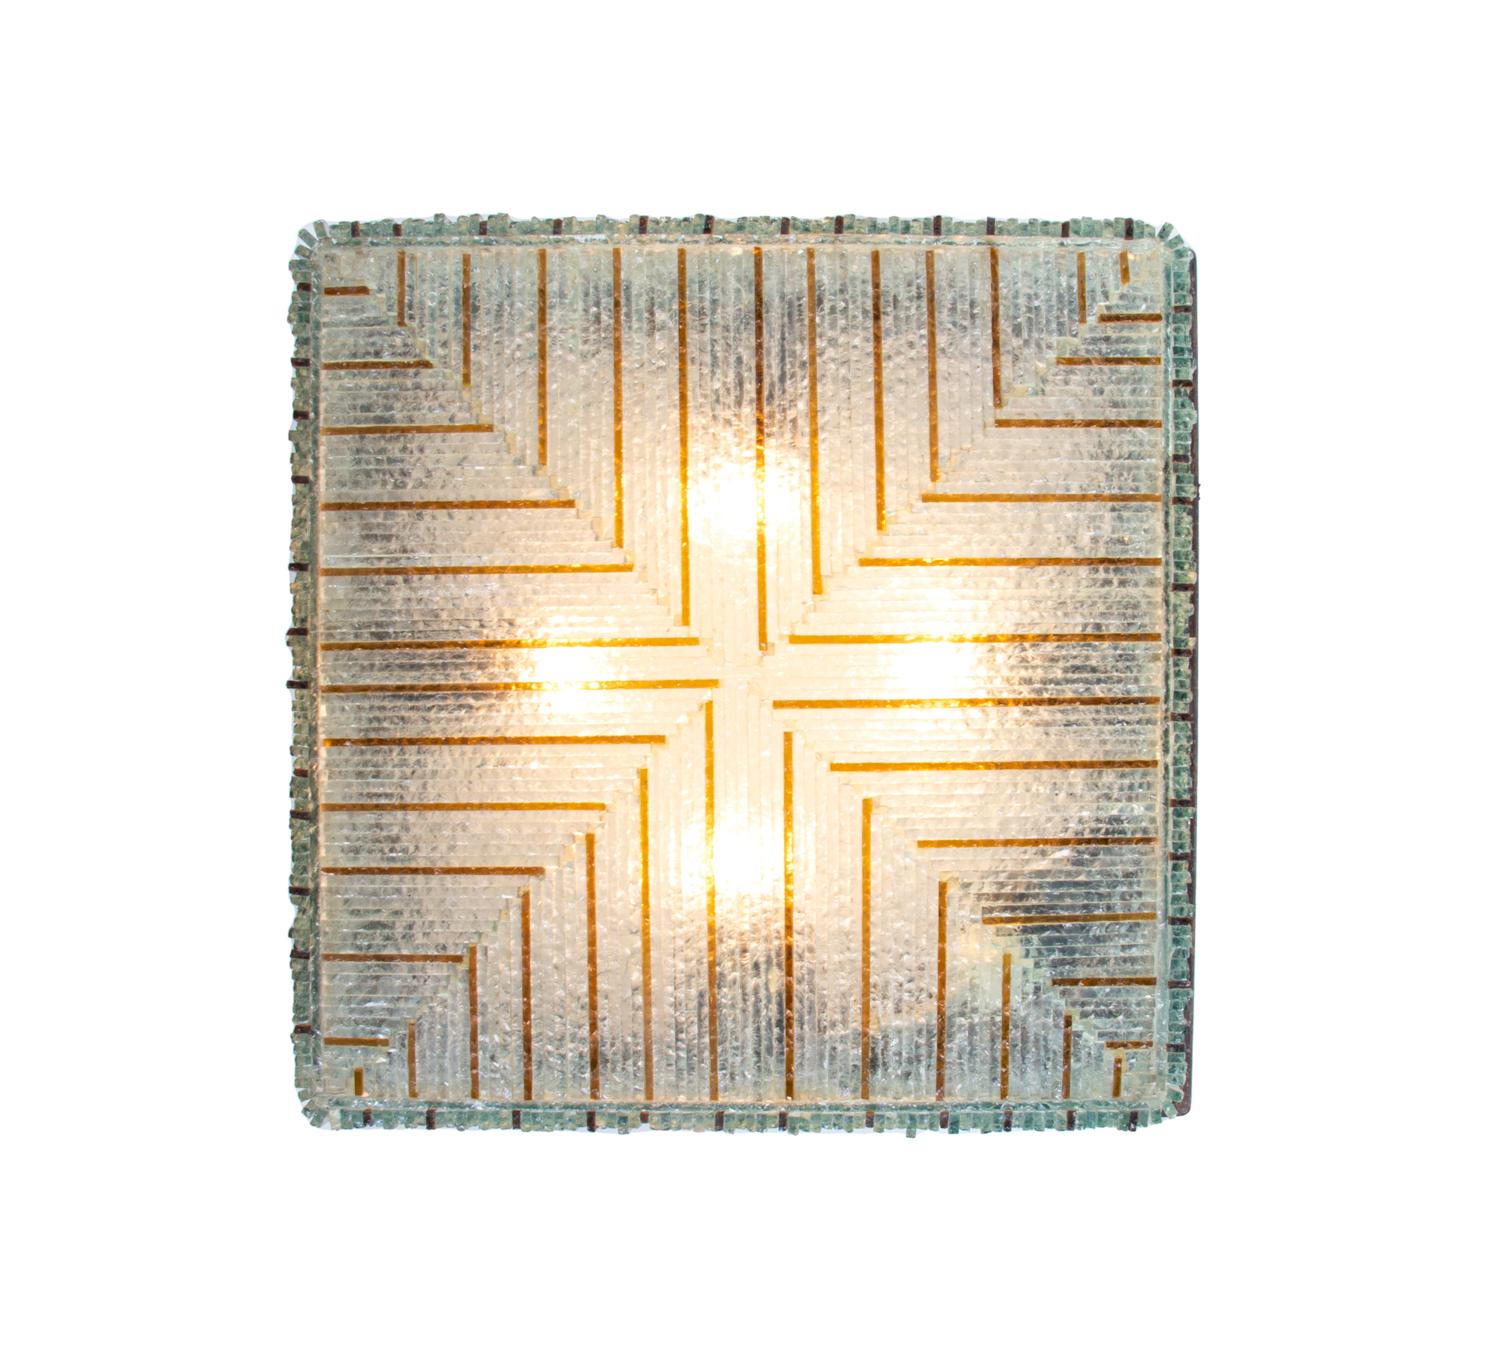 Amazing heavy brutalist flush mount made of rough-cut translucent and amber glass strips mounted on a bronze frame. 
Heavy duty. With this light you make a clear statement in your interior design. Gem from the time. A real eye-catcher even unlit.